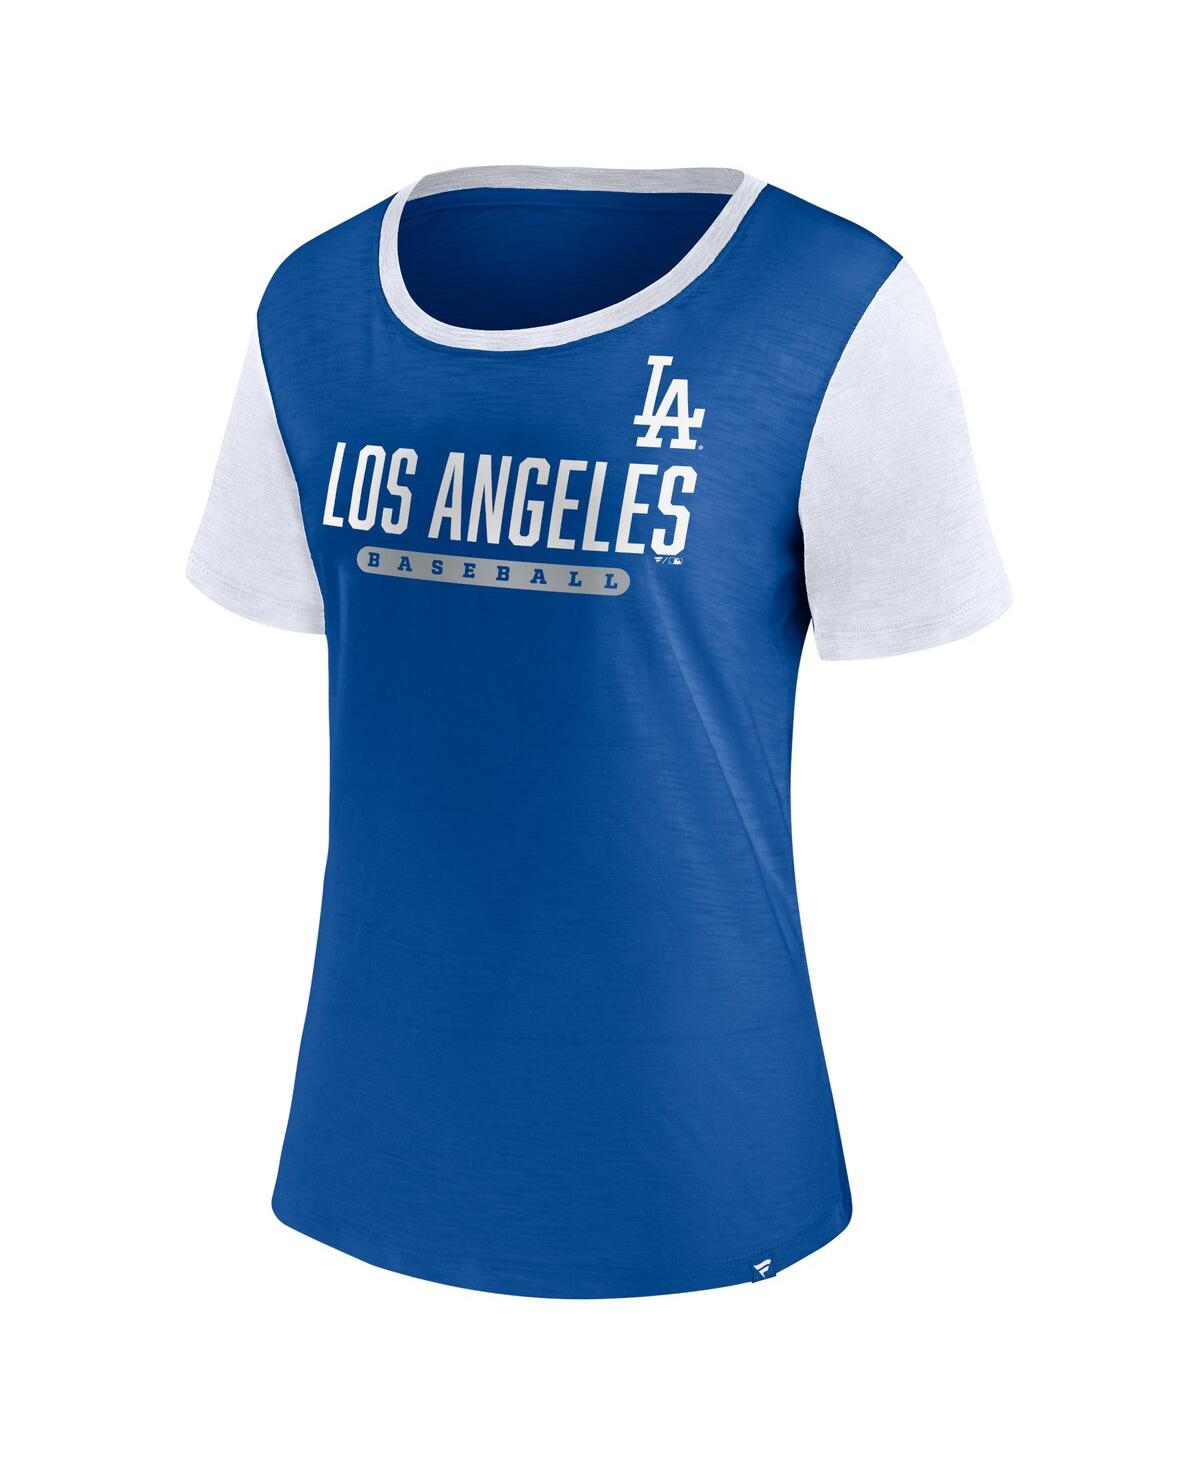 Los Angeles Dodgers Fanatics Branded Player Pack T-Shirt Combo Set -  Royal/White